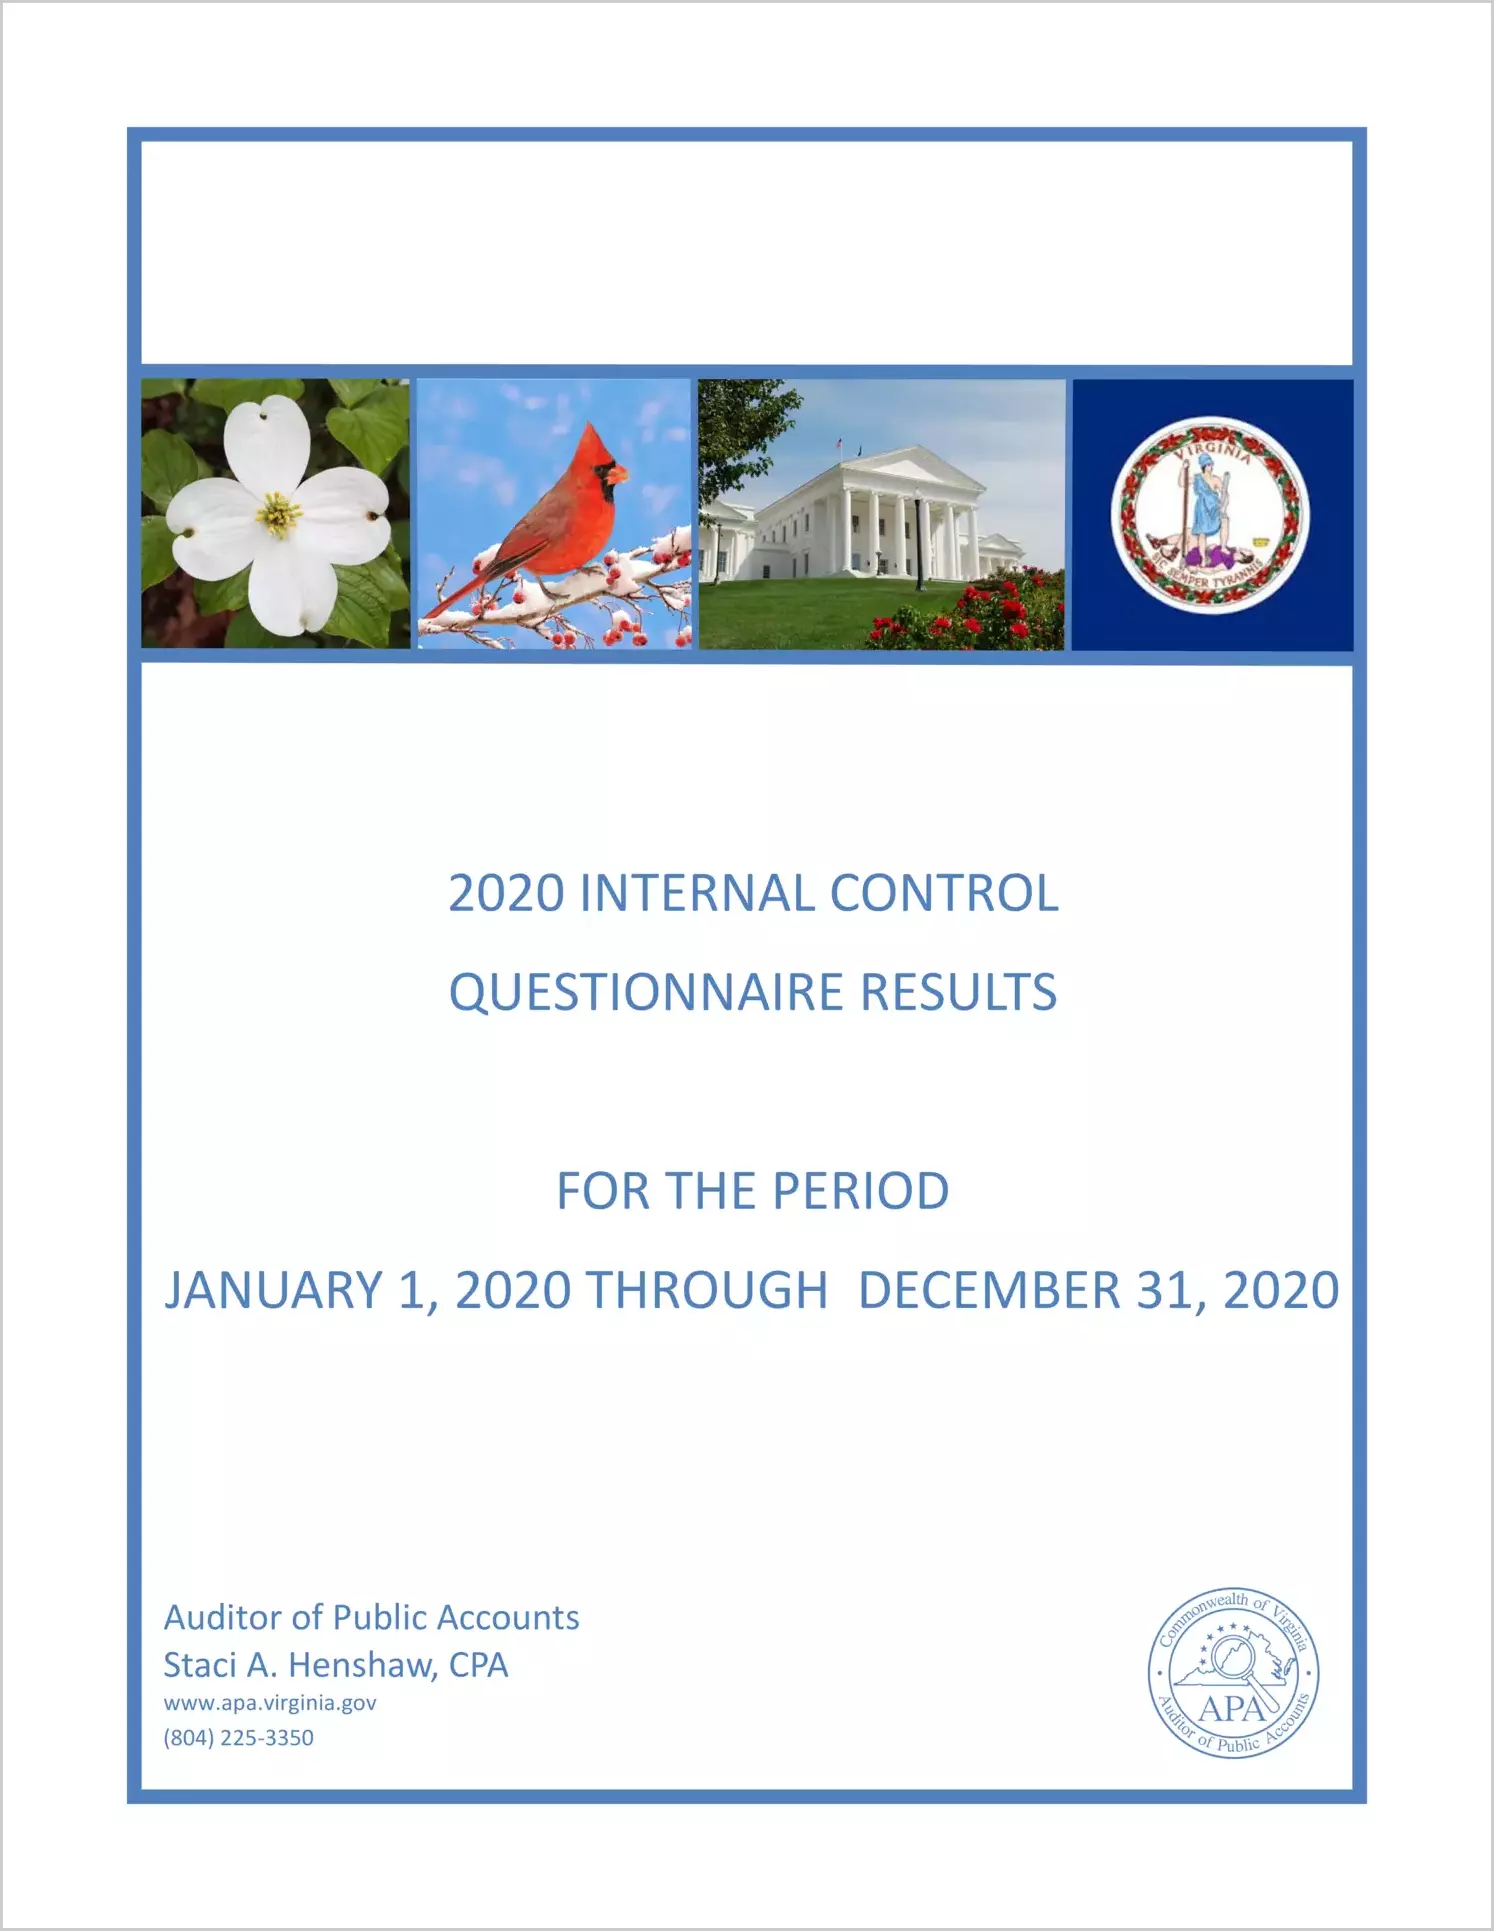 2020 Internal Control Questionnaire Results for the period January 1, 2020 through December 31, 2020